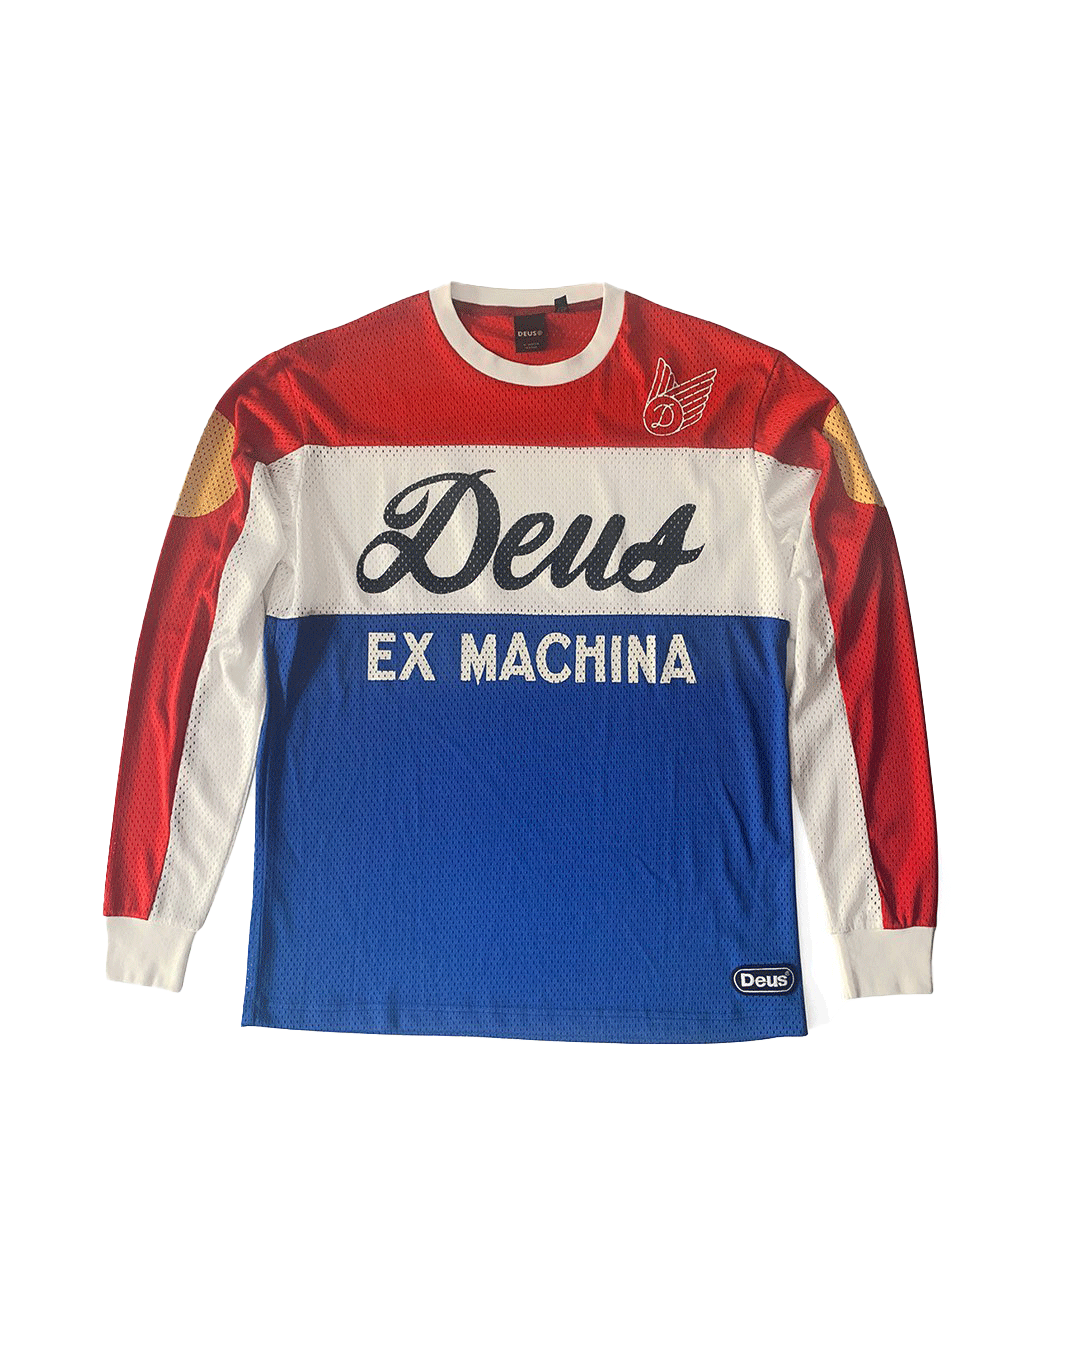 Multi-coloured regular fit multi panel l/s moto jersey with chest prints and badge detailing,  100% polyester mesh fabrication with a garment wash|Flatlay